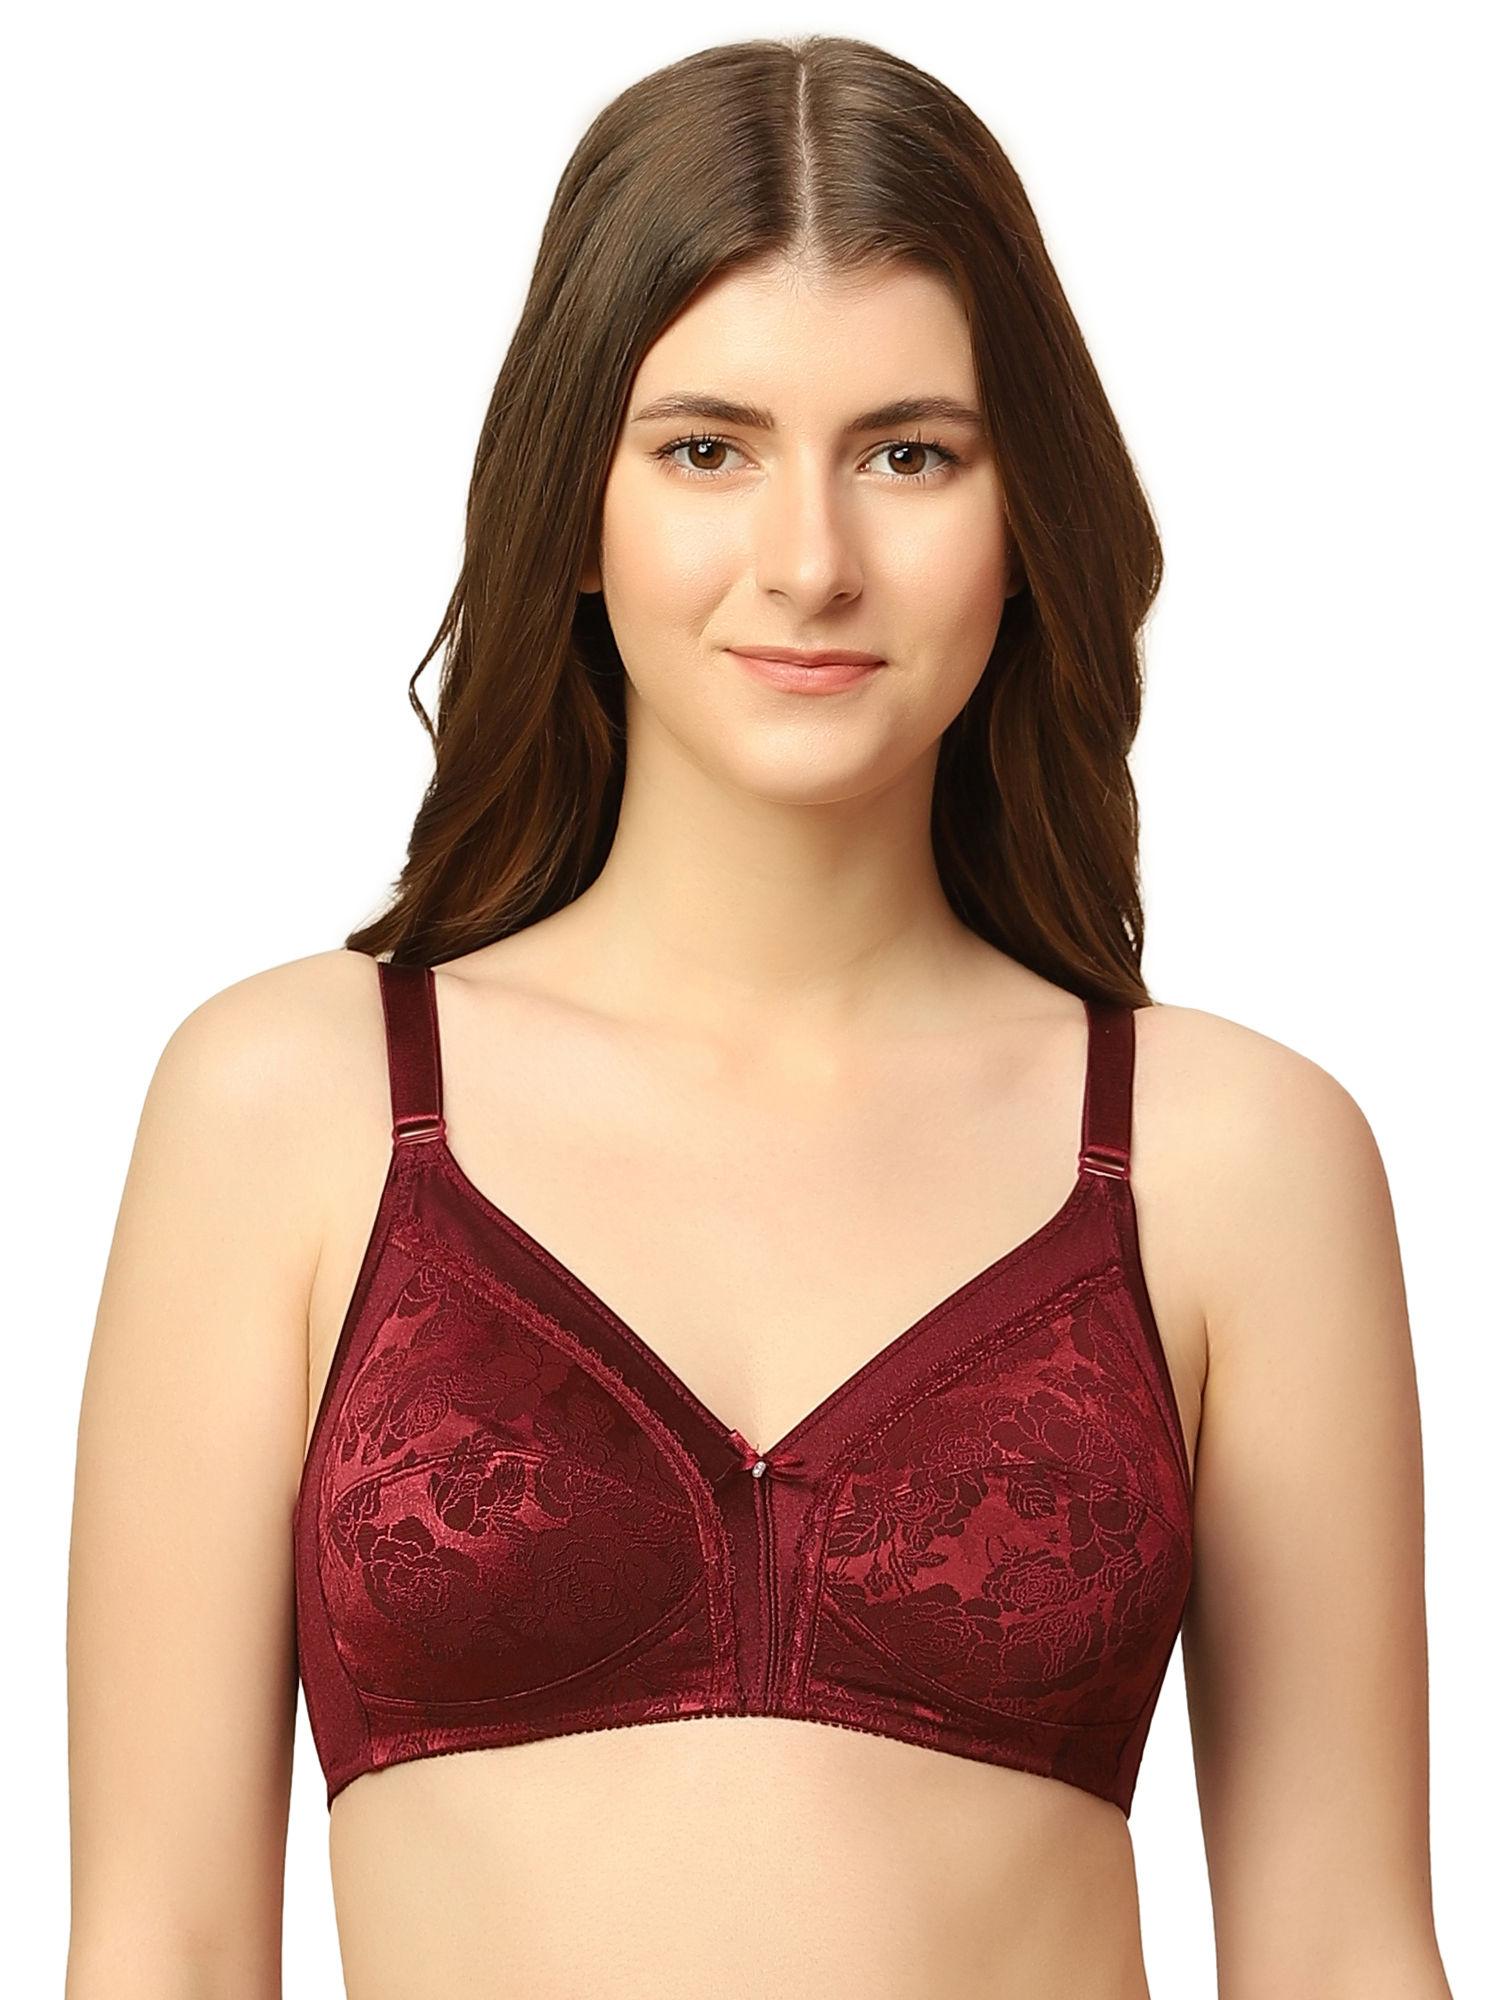 jollyfit deluxe non-padded non-wired full coverage everyday bra - maroon